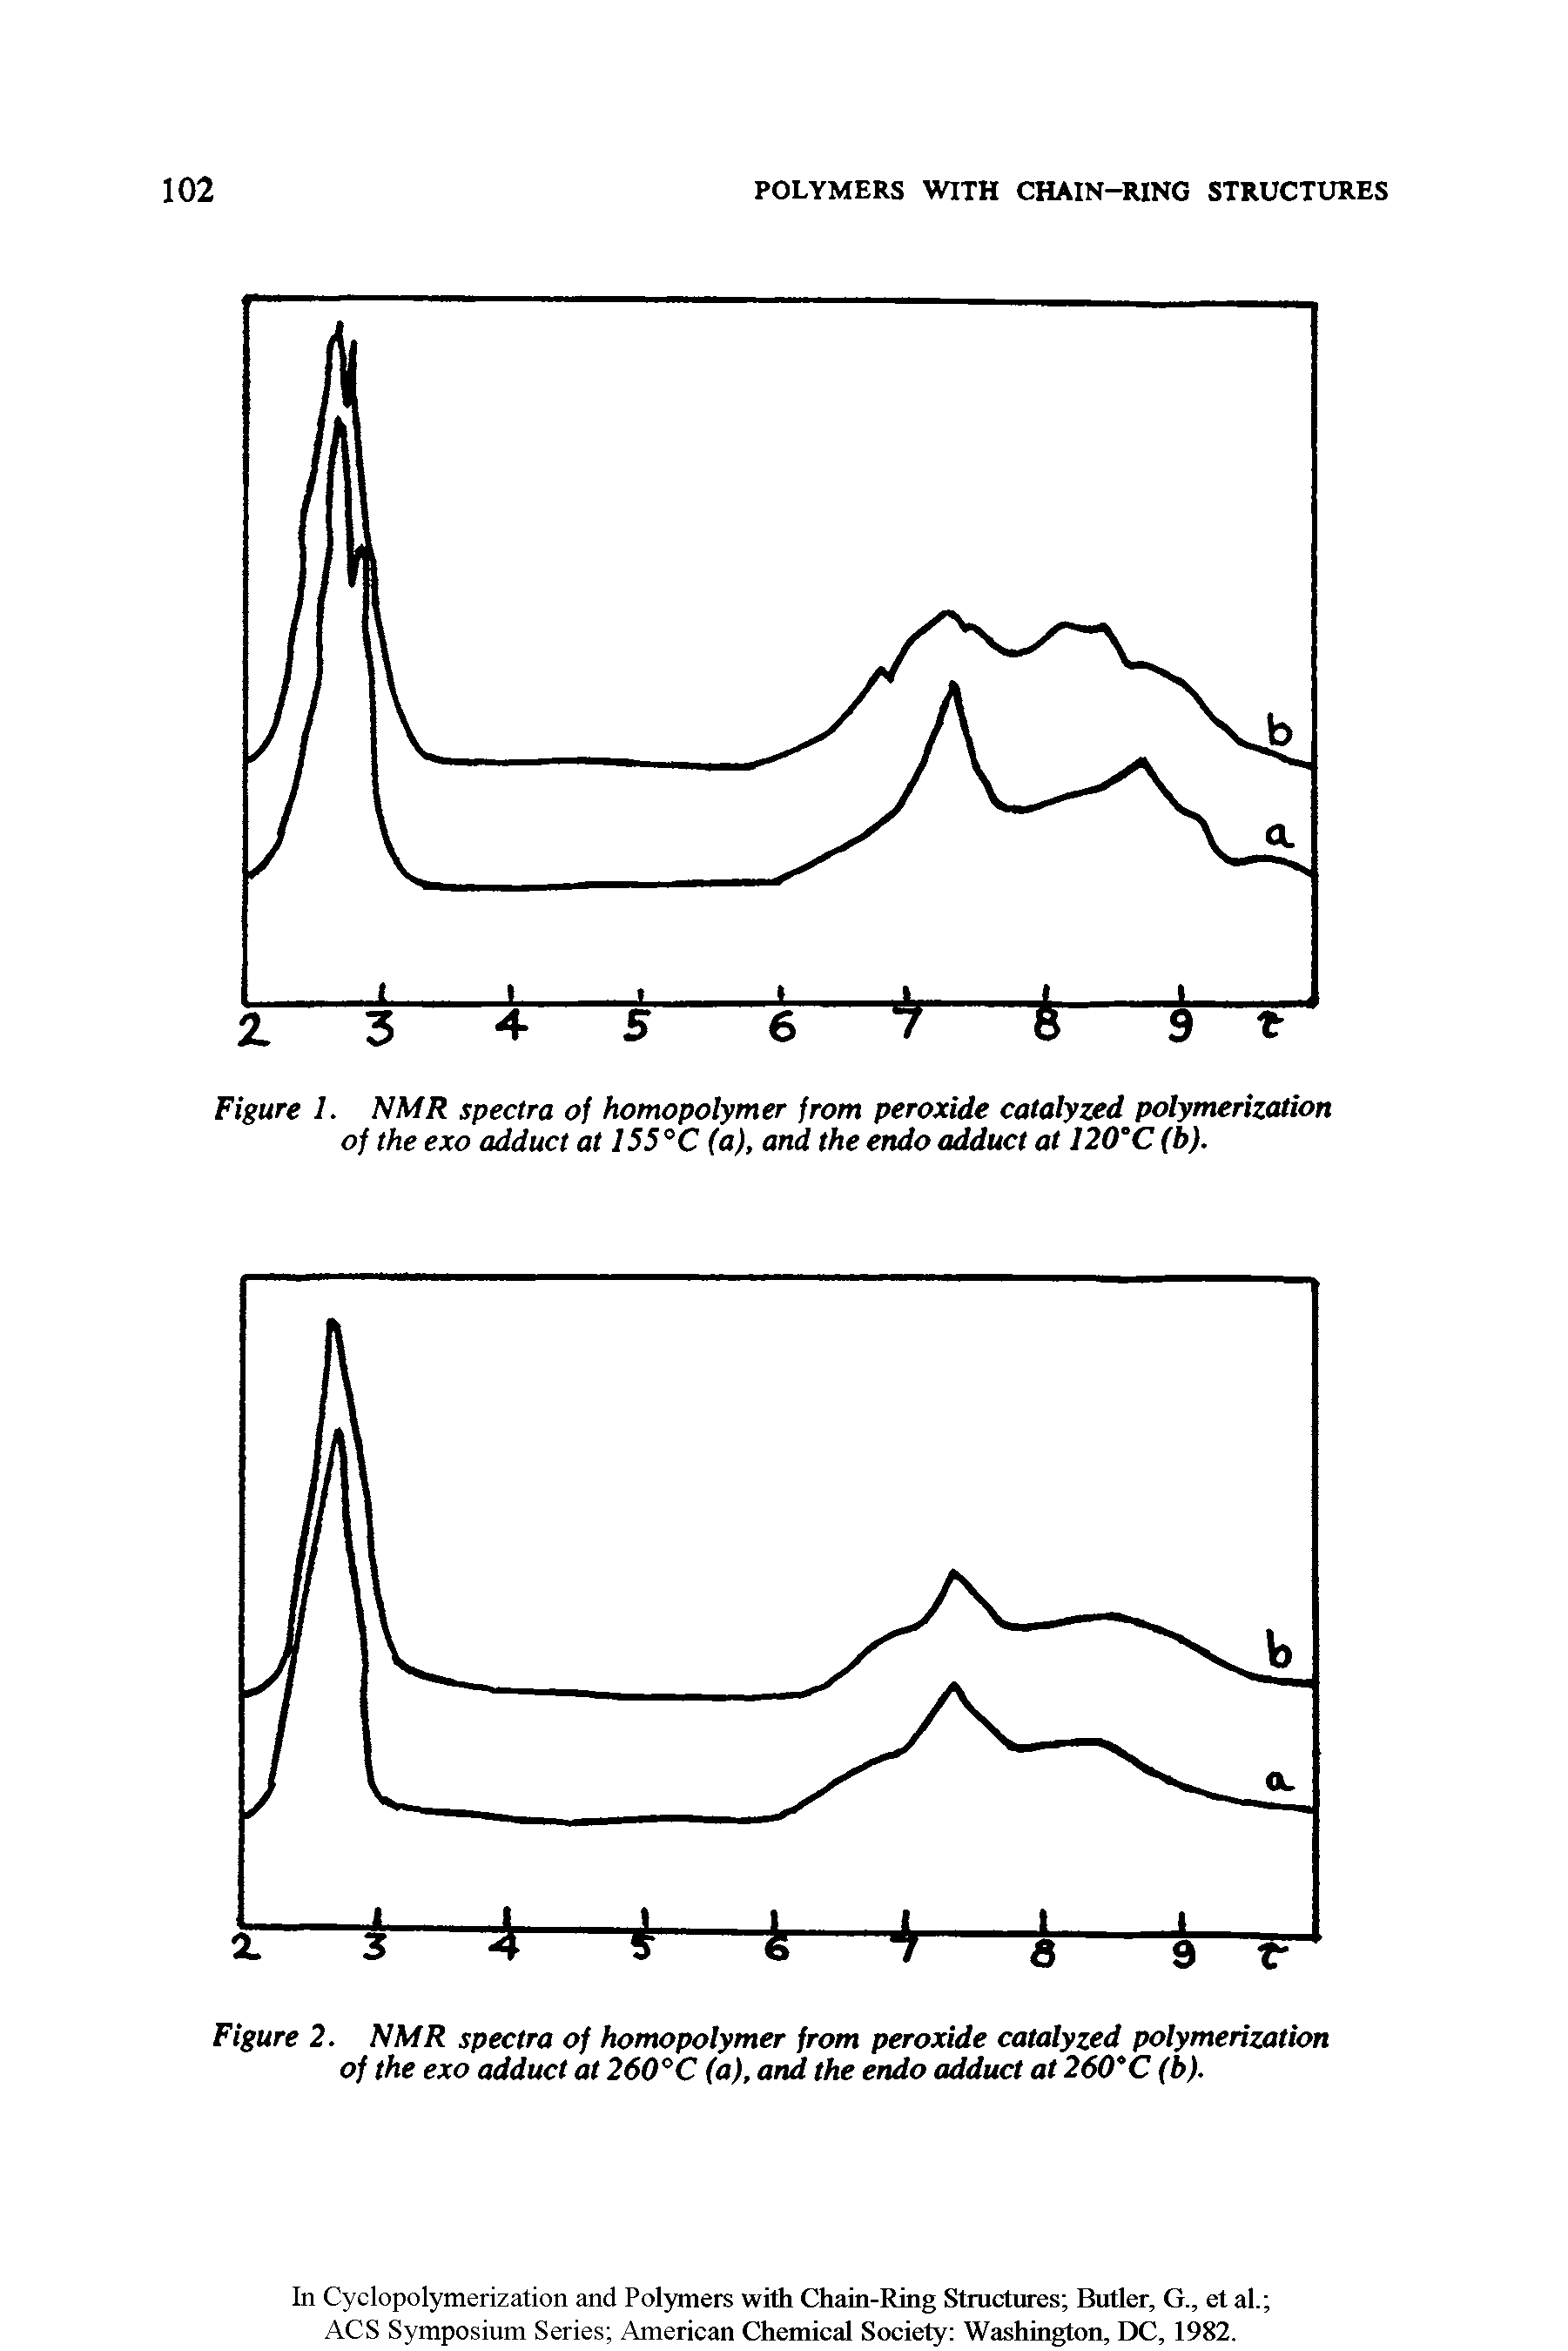 Figure 1. NMR spectra of homopolymer from peroxide catalyzed polymerization of the exo adduct at 155°C (a), and the endo adduct at 120°C (b).